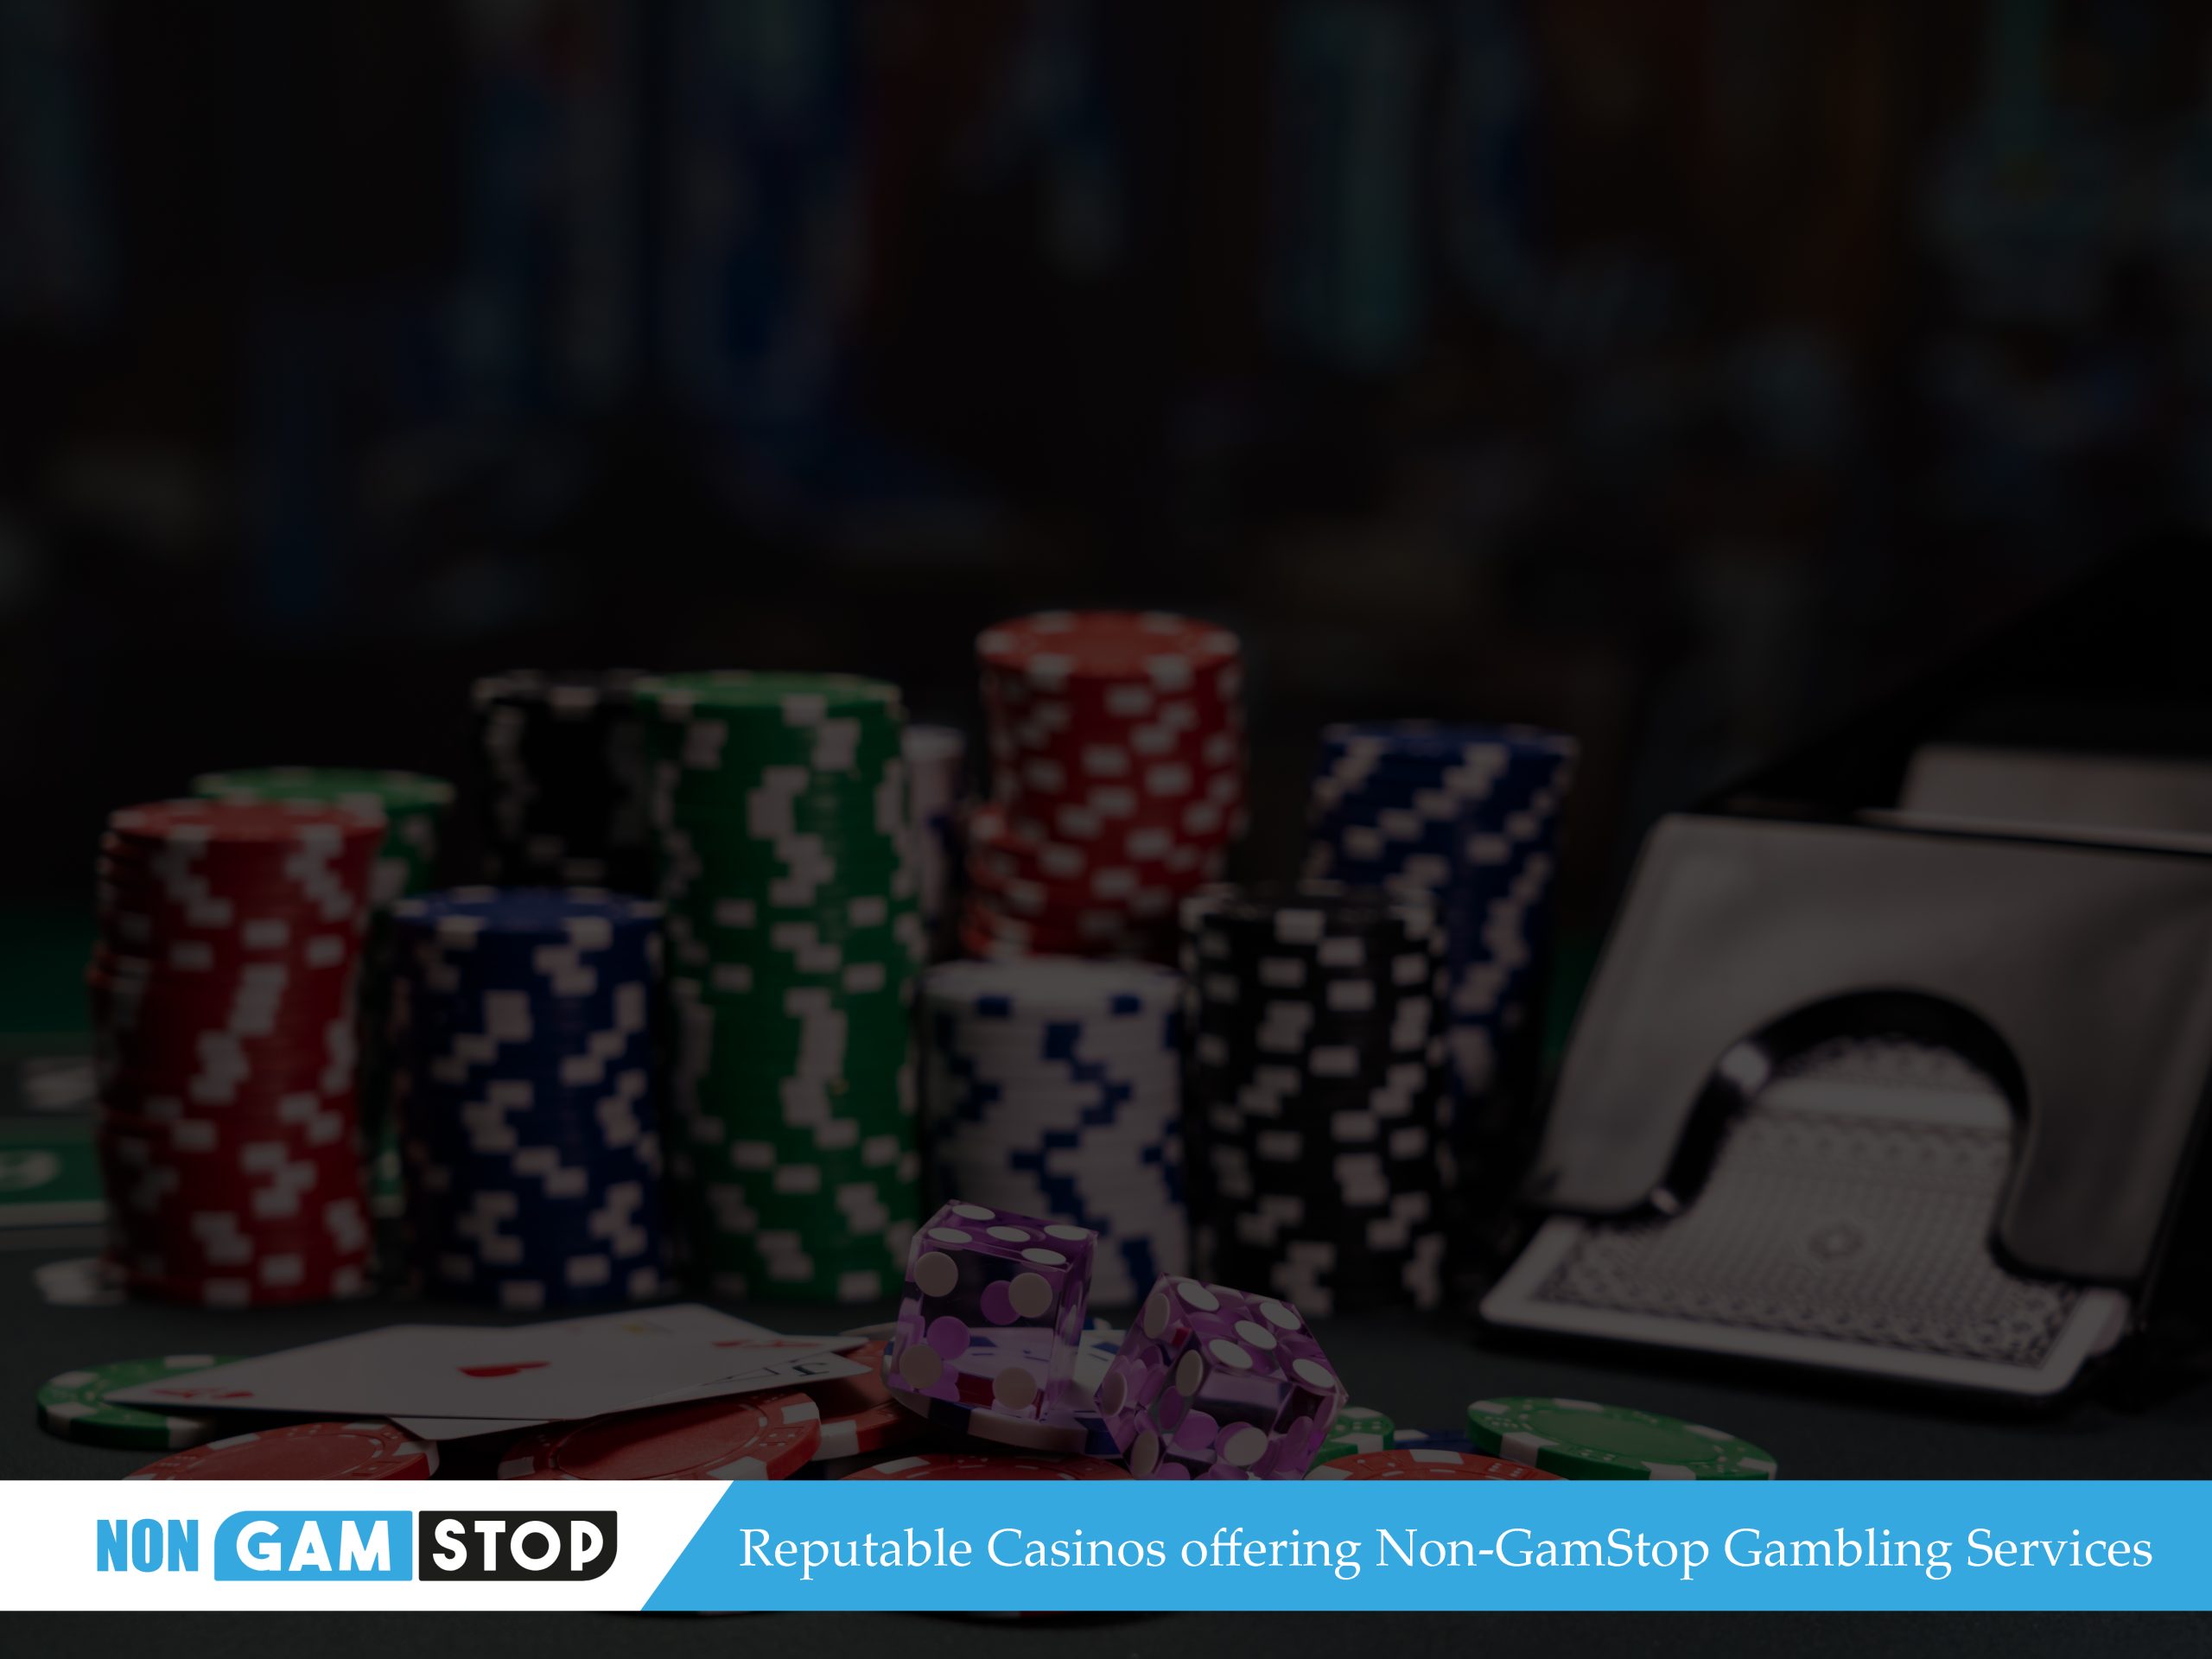 Reputable Casinos offering Non-GamStop Gambling Services